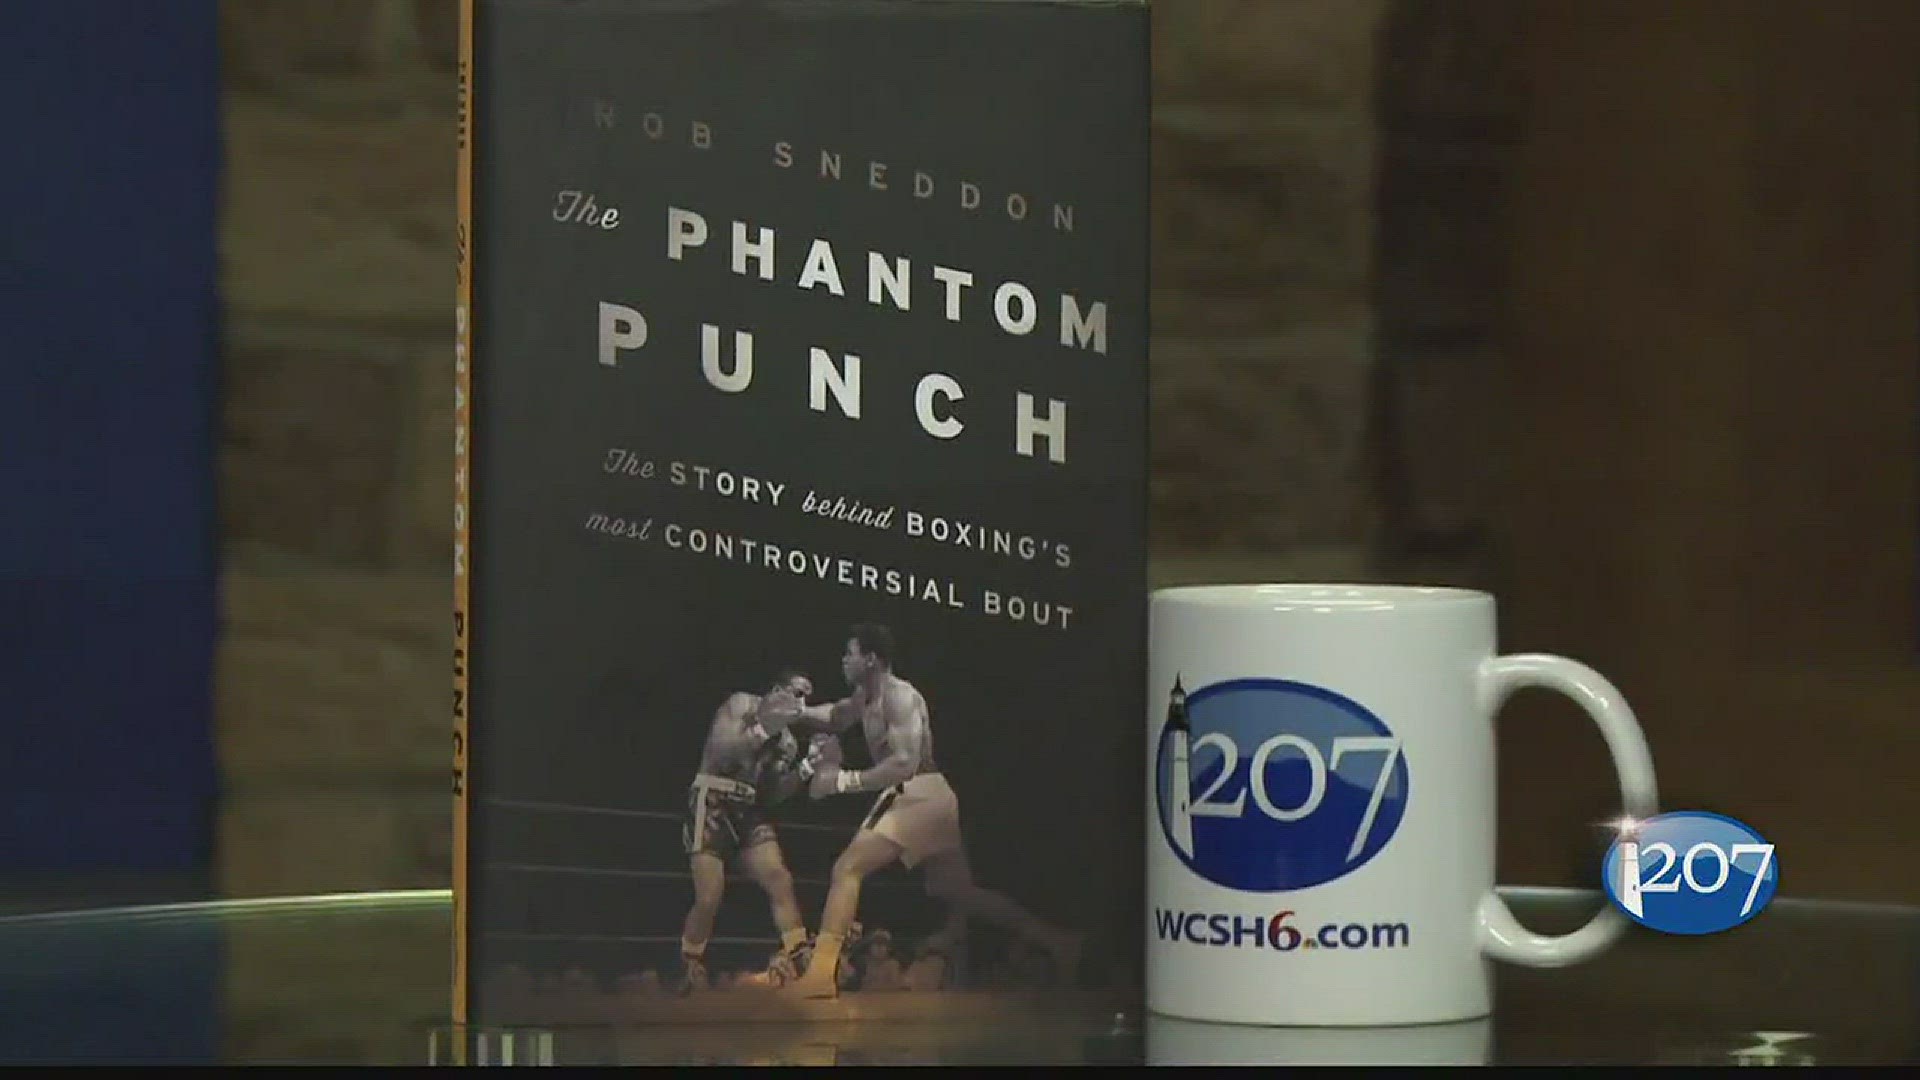 Rob Sneddon's latest book, "The Phantom Punch," examines every aspect around the boxing match in Lewiston between Muhammad Ali and Sonny Liston and its controversial conclusion.